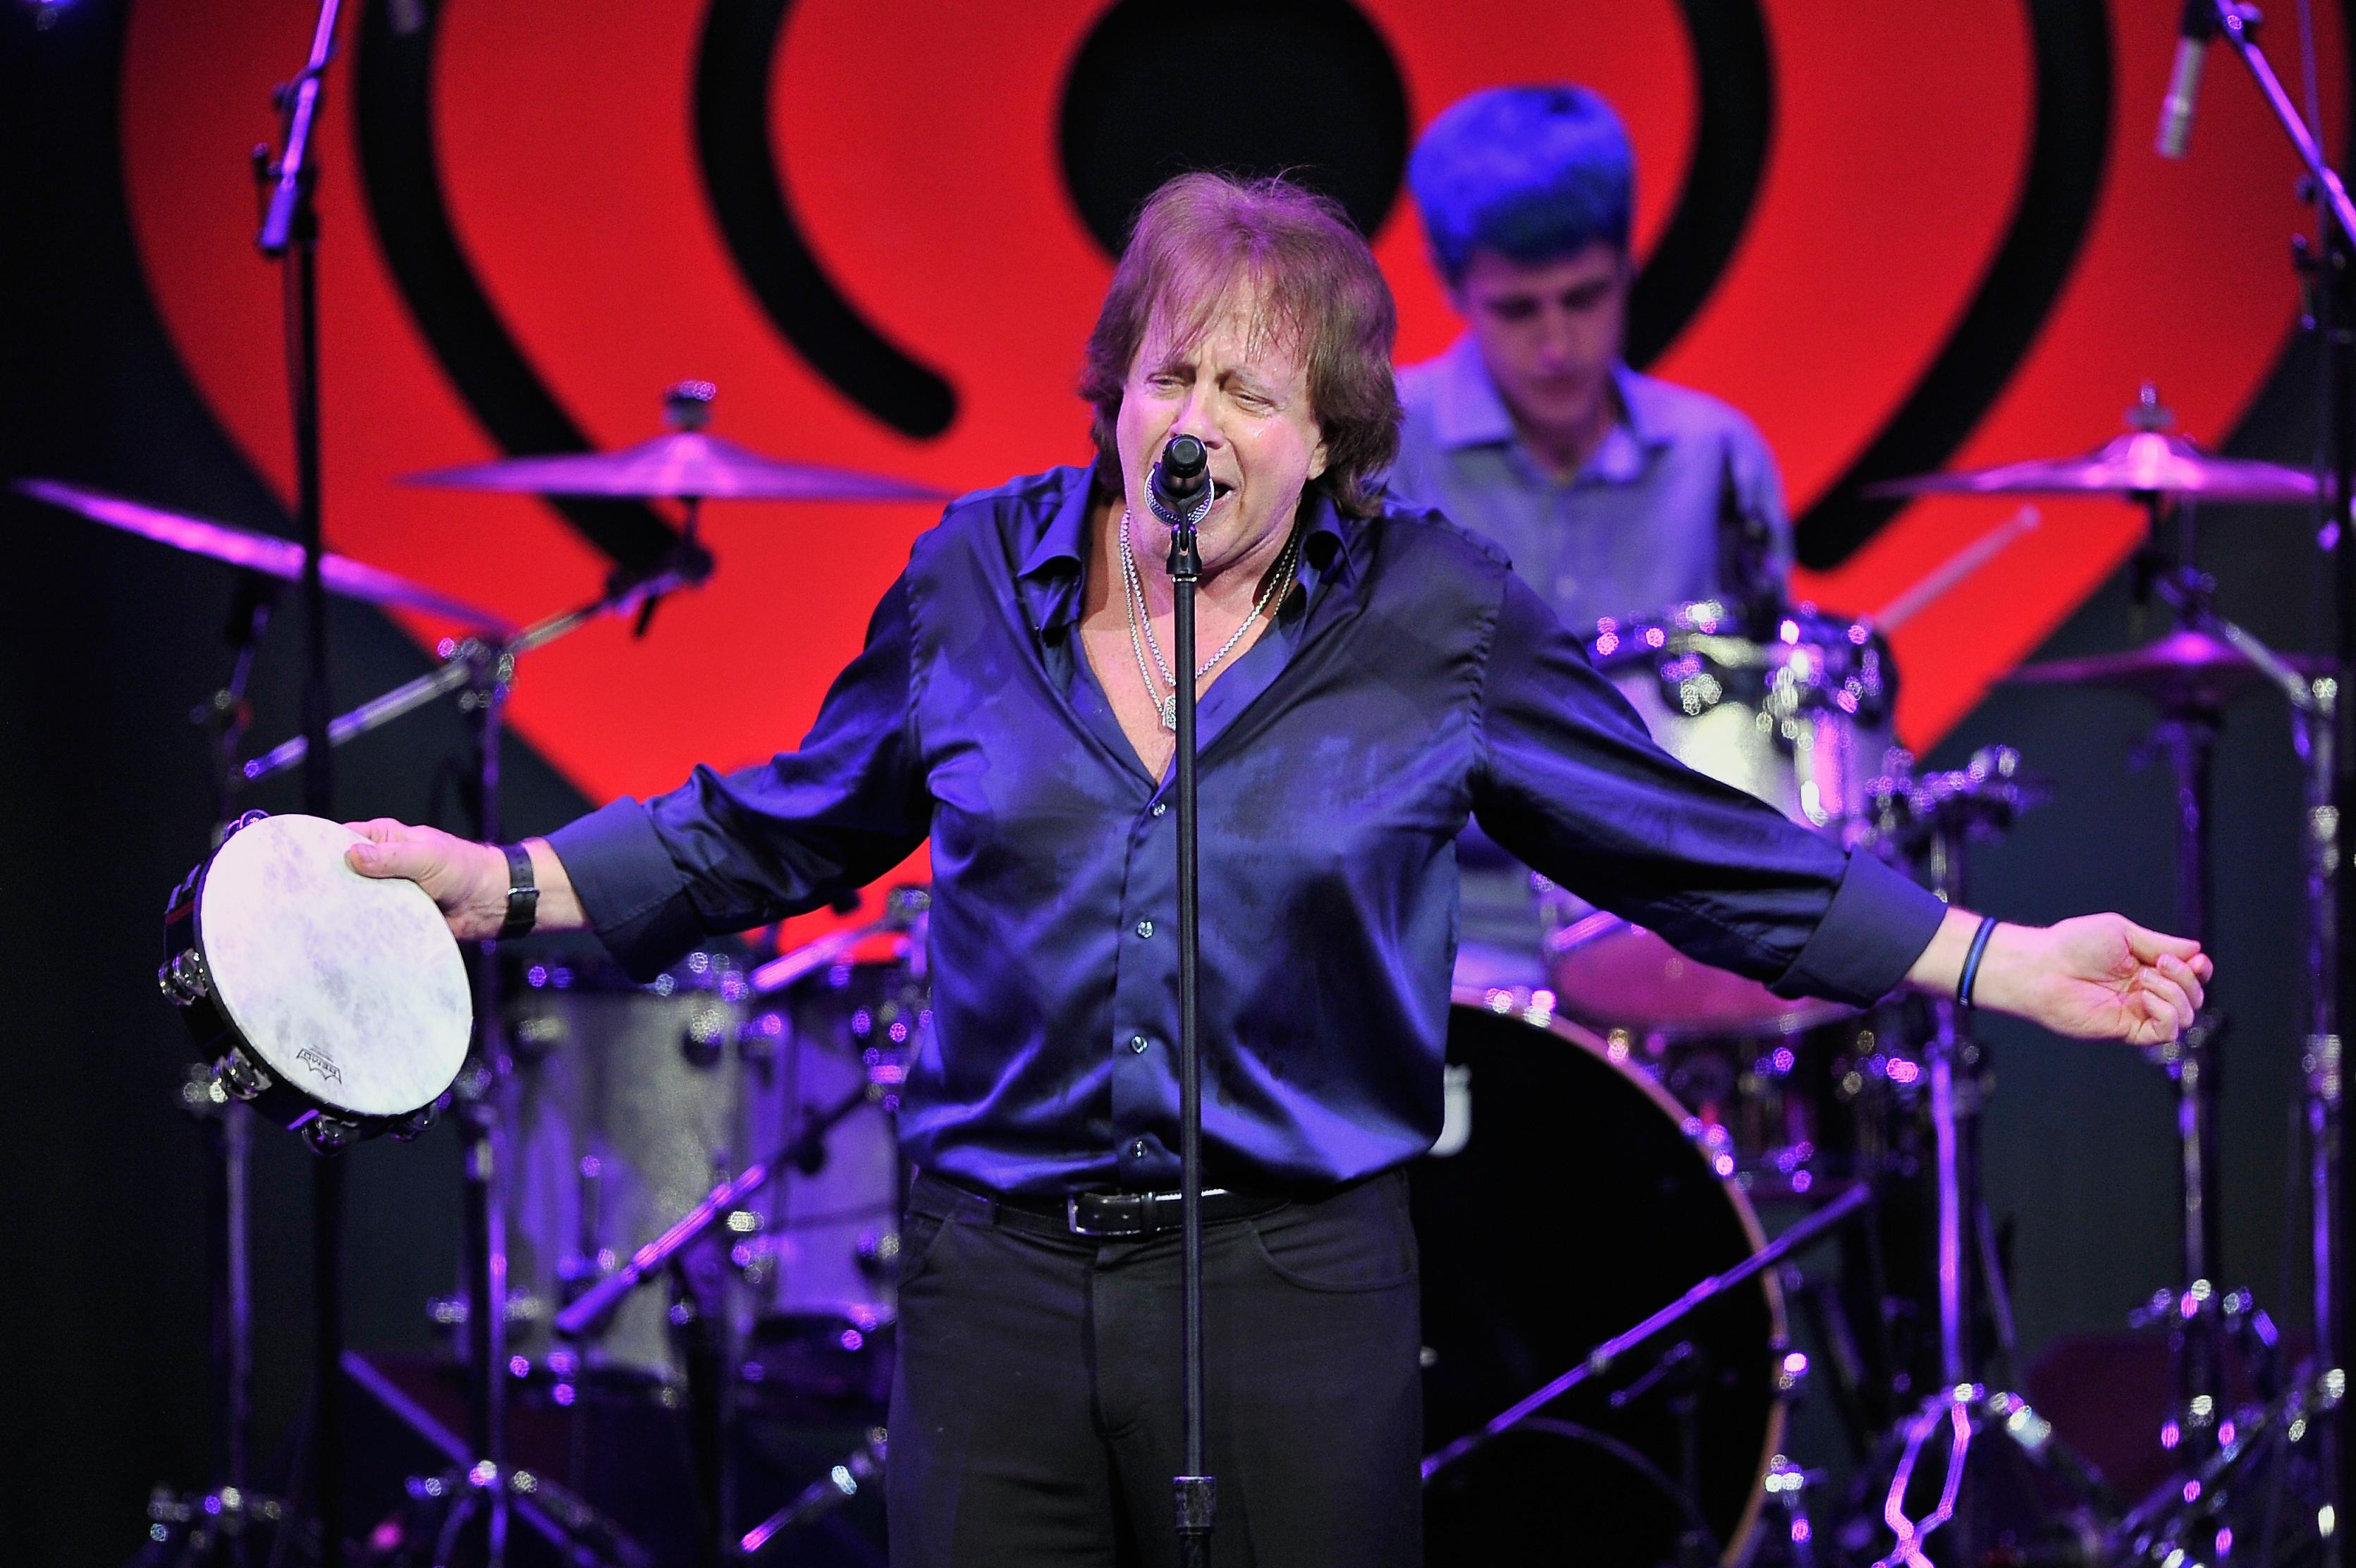 Eddie Money’s Death Certificate Reveals He Was Cremated, Barrett’s Esophagus Contributed To His Death